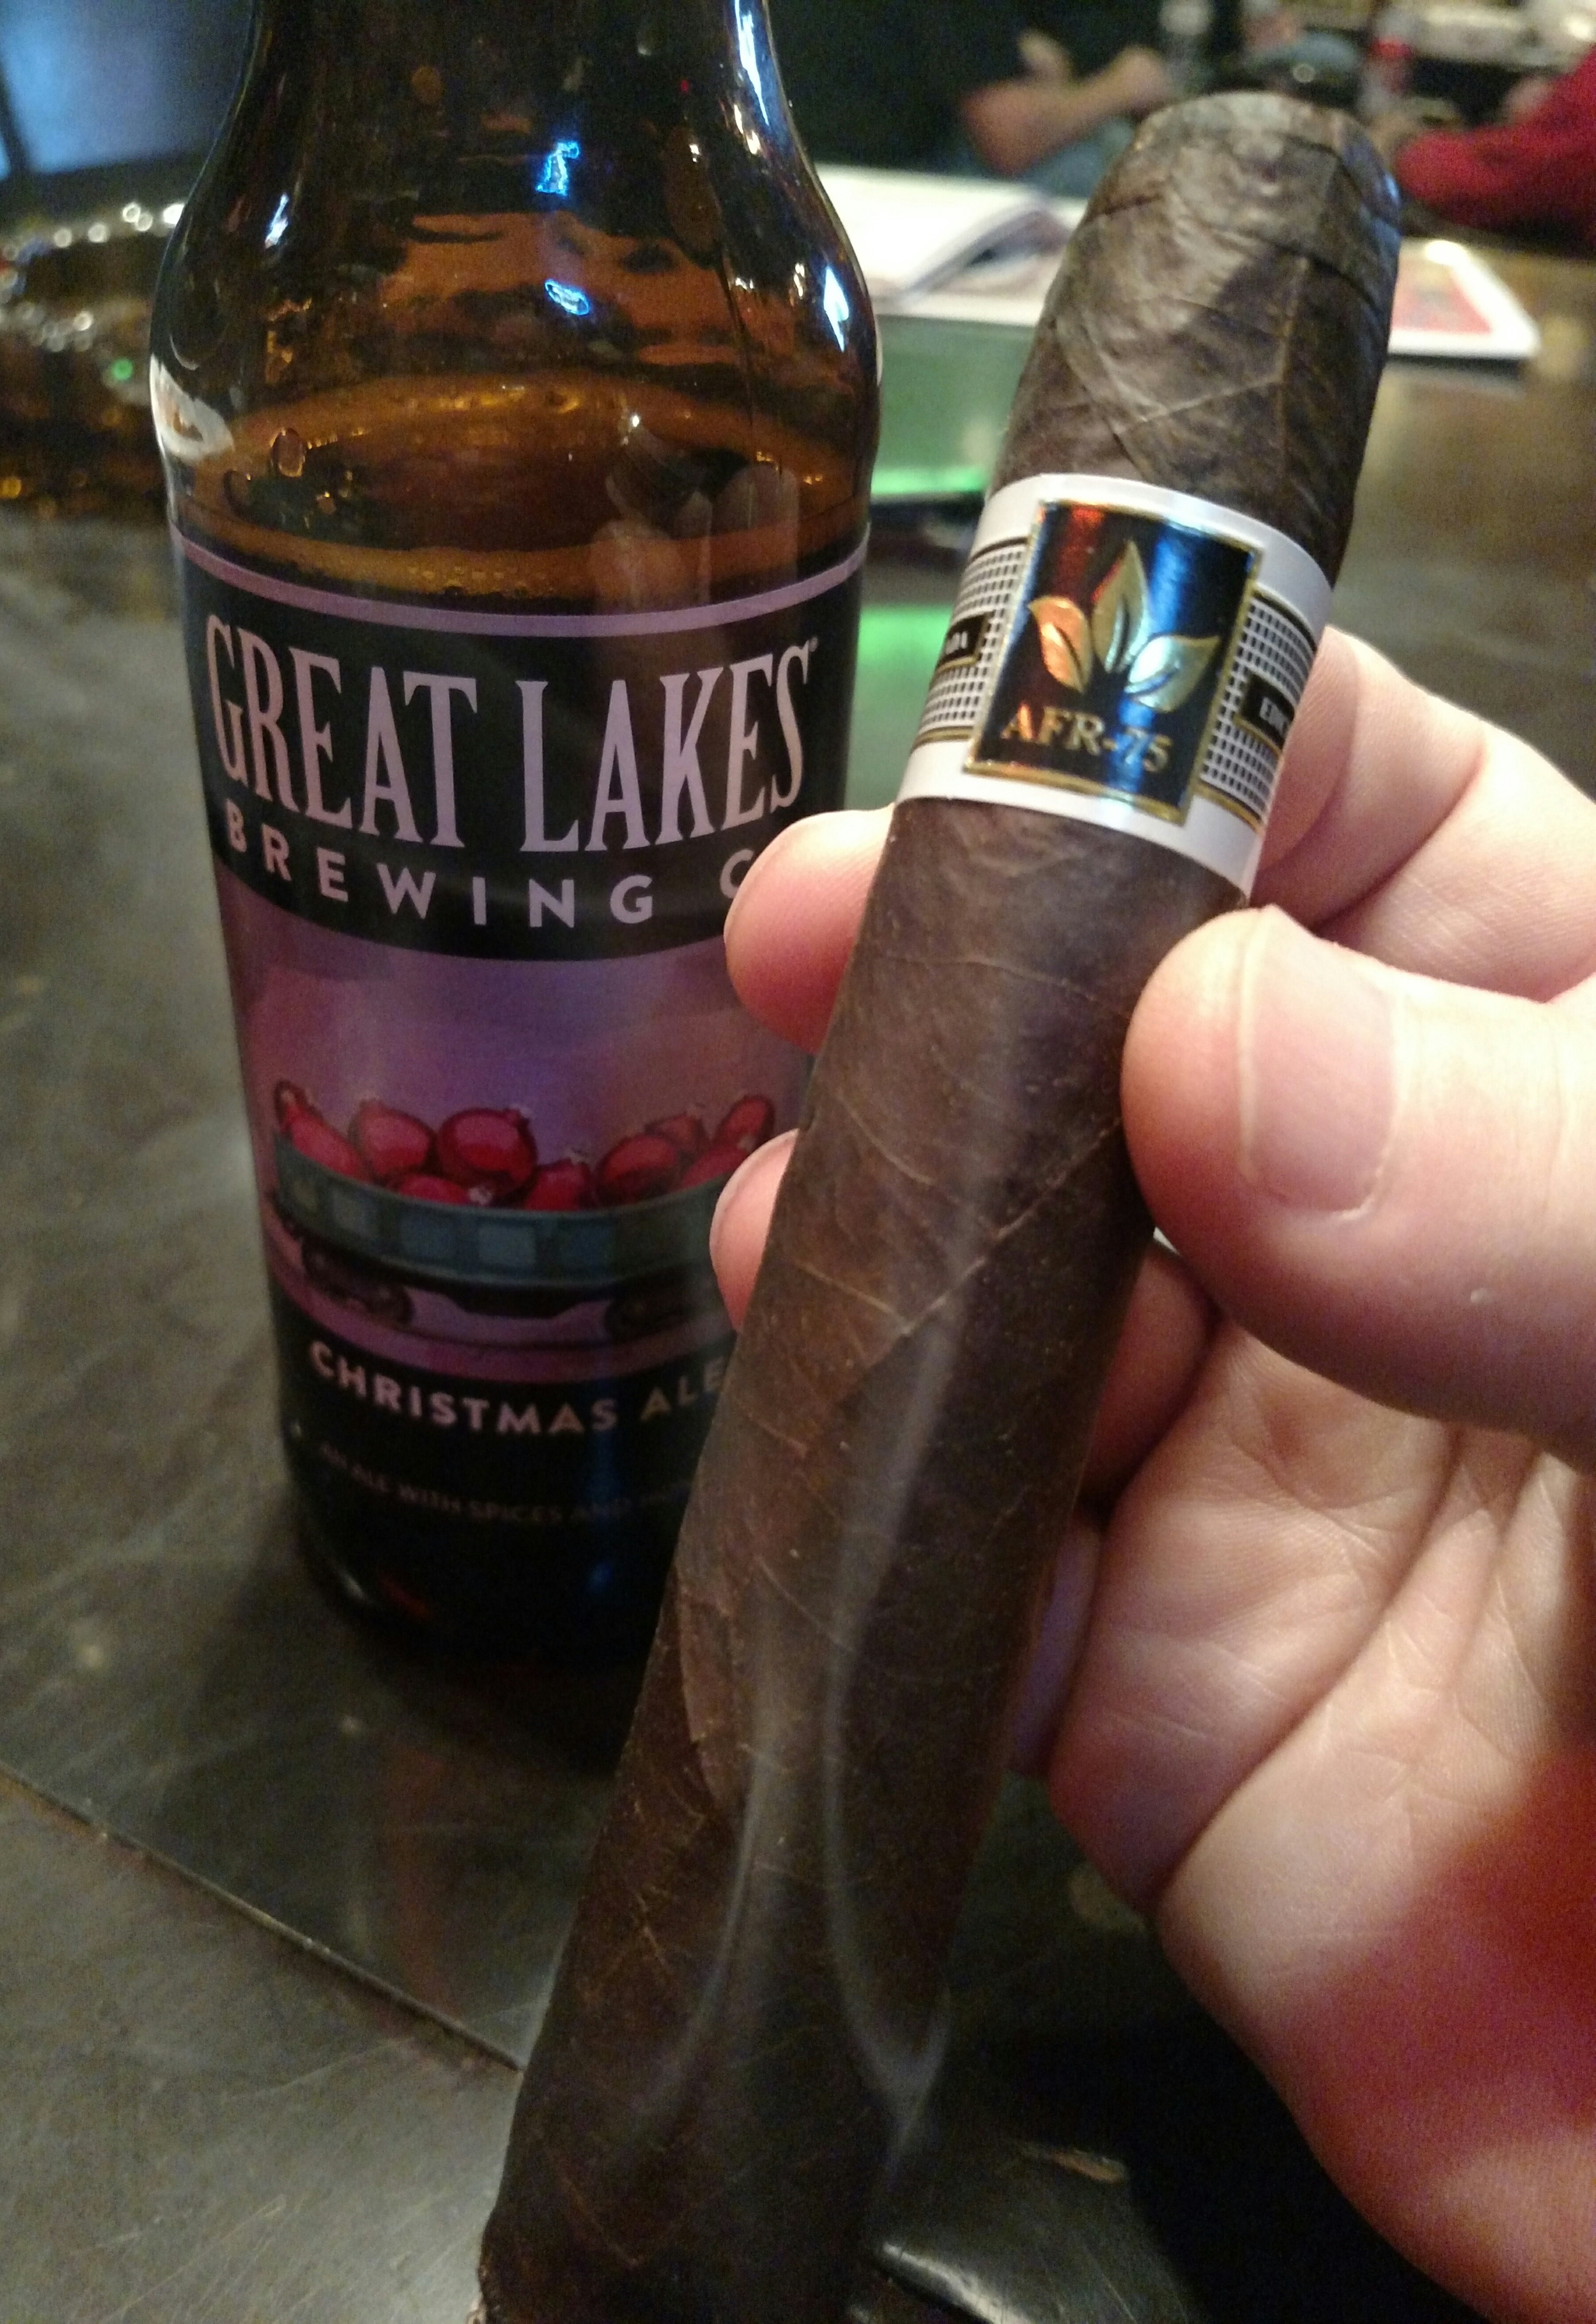 Enjoying an AFR-75 with a Great Lakes Christmas Ale at The Cigar Affair